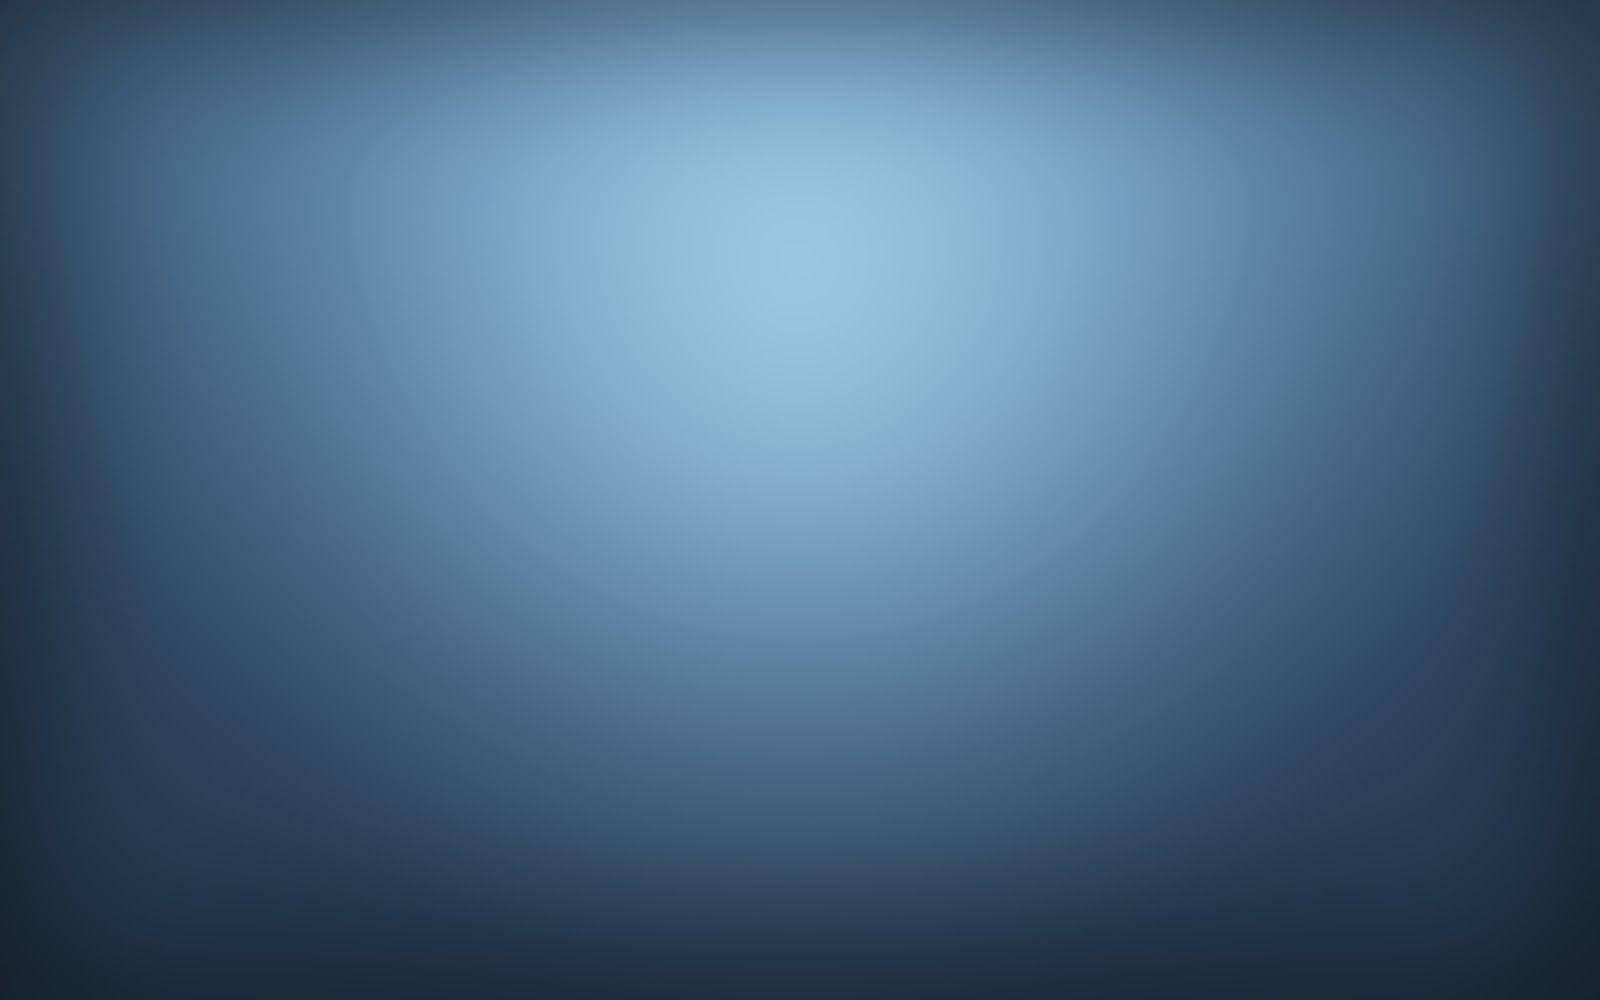 Dark Blue Gradient Image With A Plain Background Wallpaper